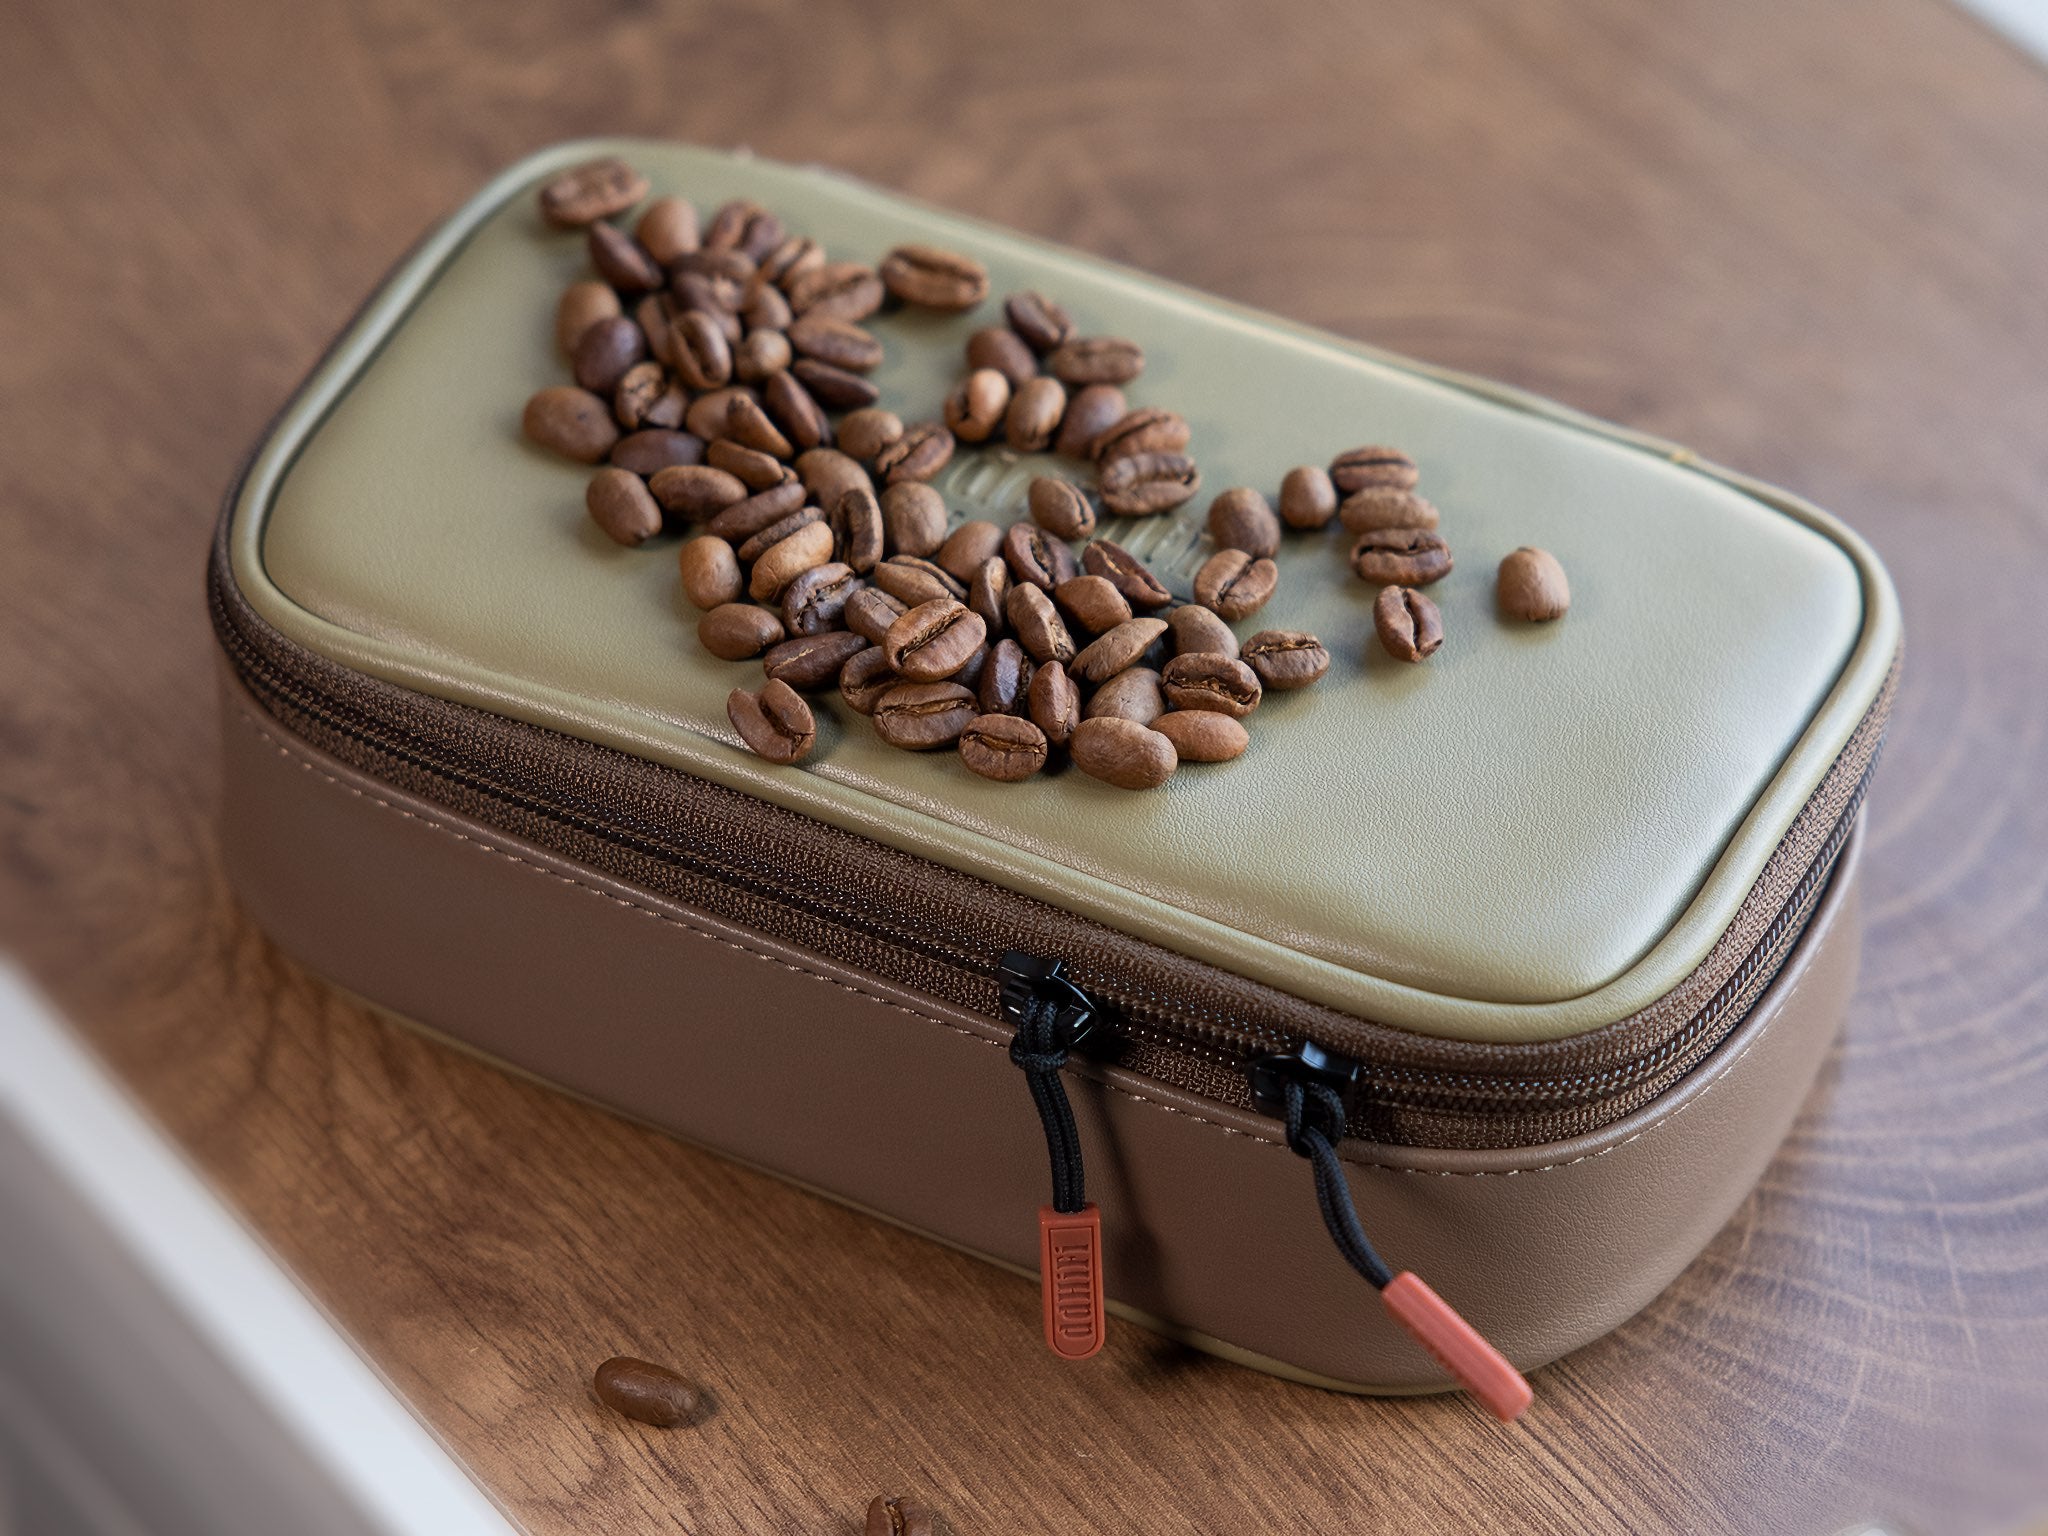 ddHiFi CZ180 portable case with coffee beans on top